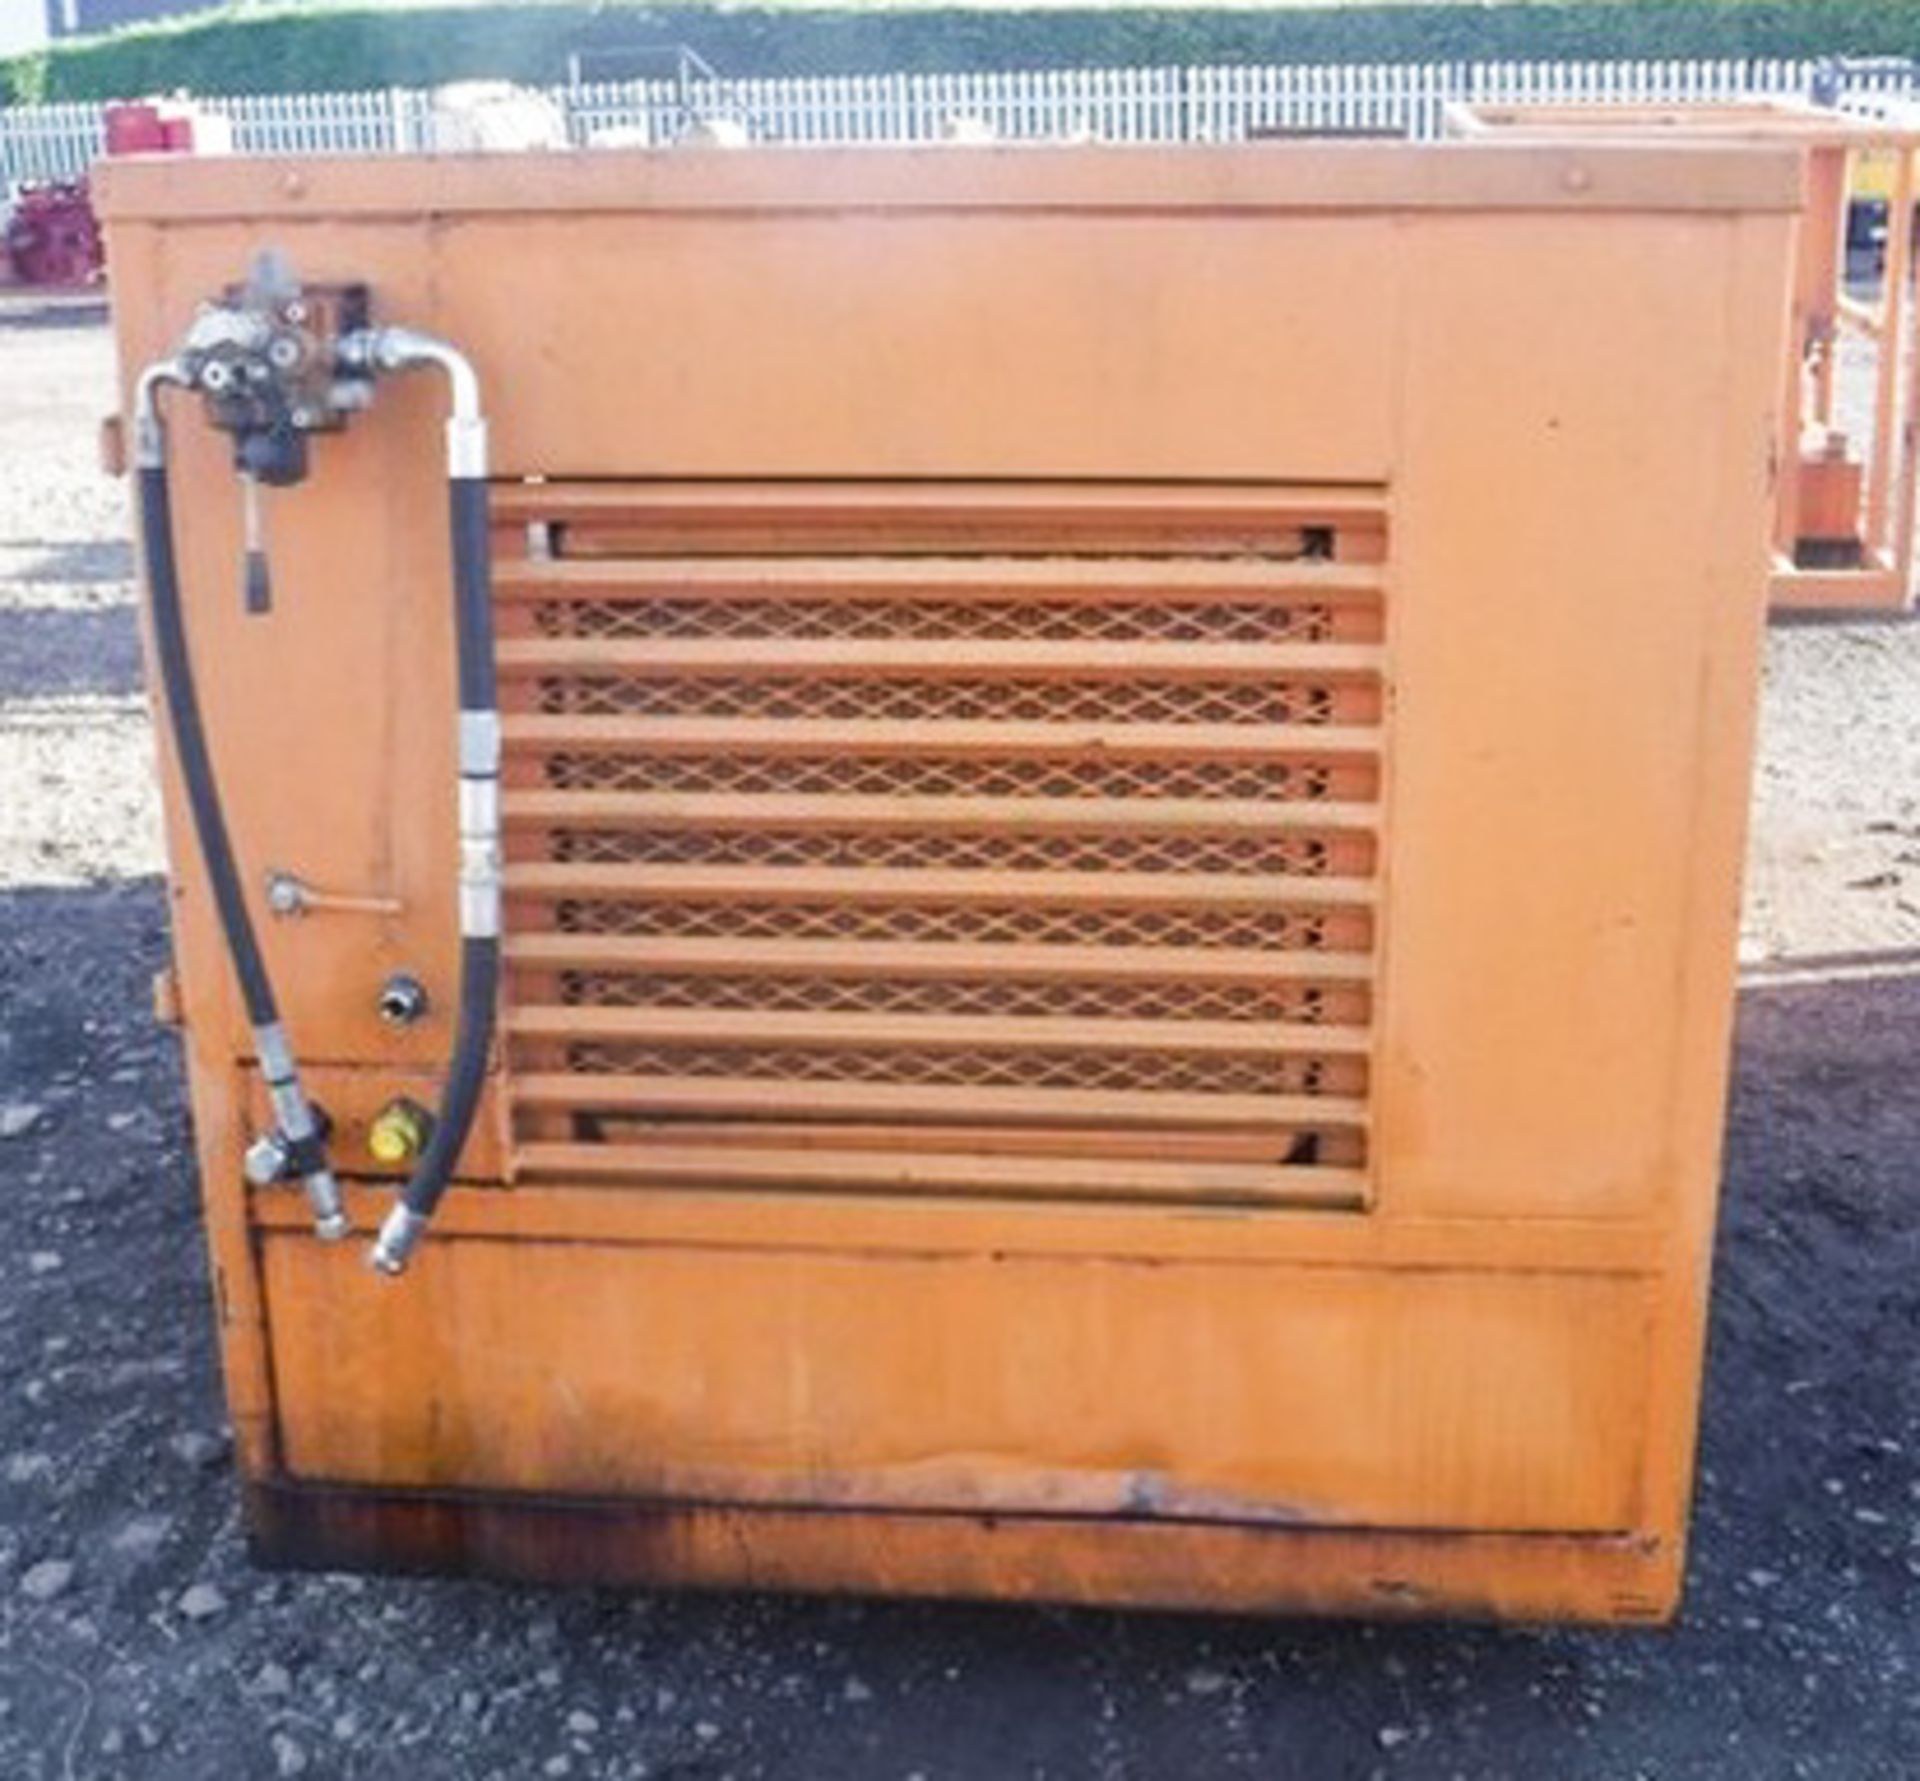 1999 CATERPILLAR ENGINE DRIVEN COMPRESSOR IN SKID CAGE, S/N P15X23160 - Image 2 of 4